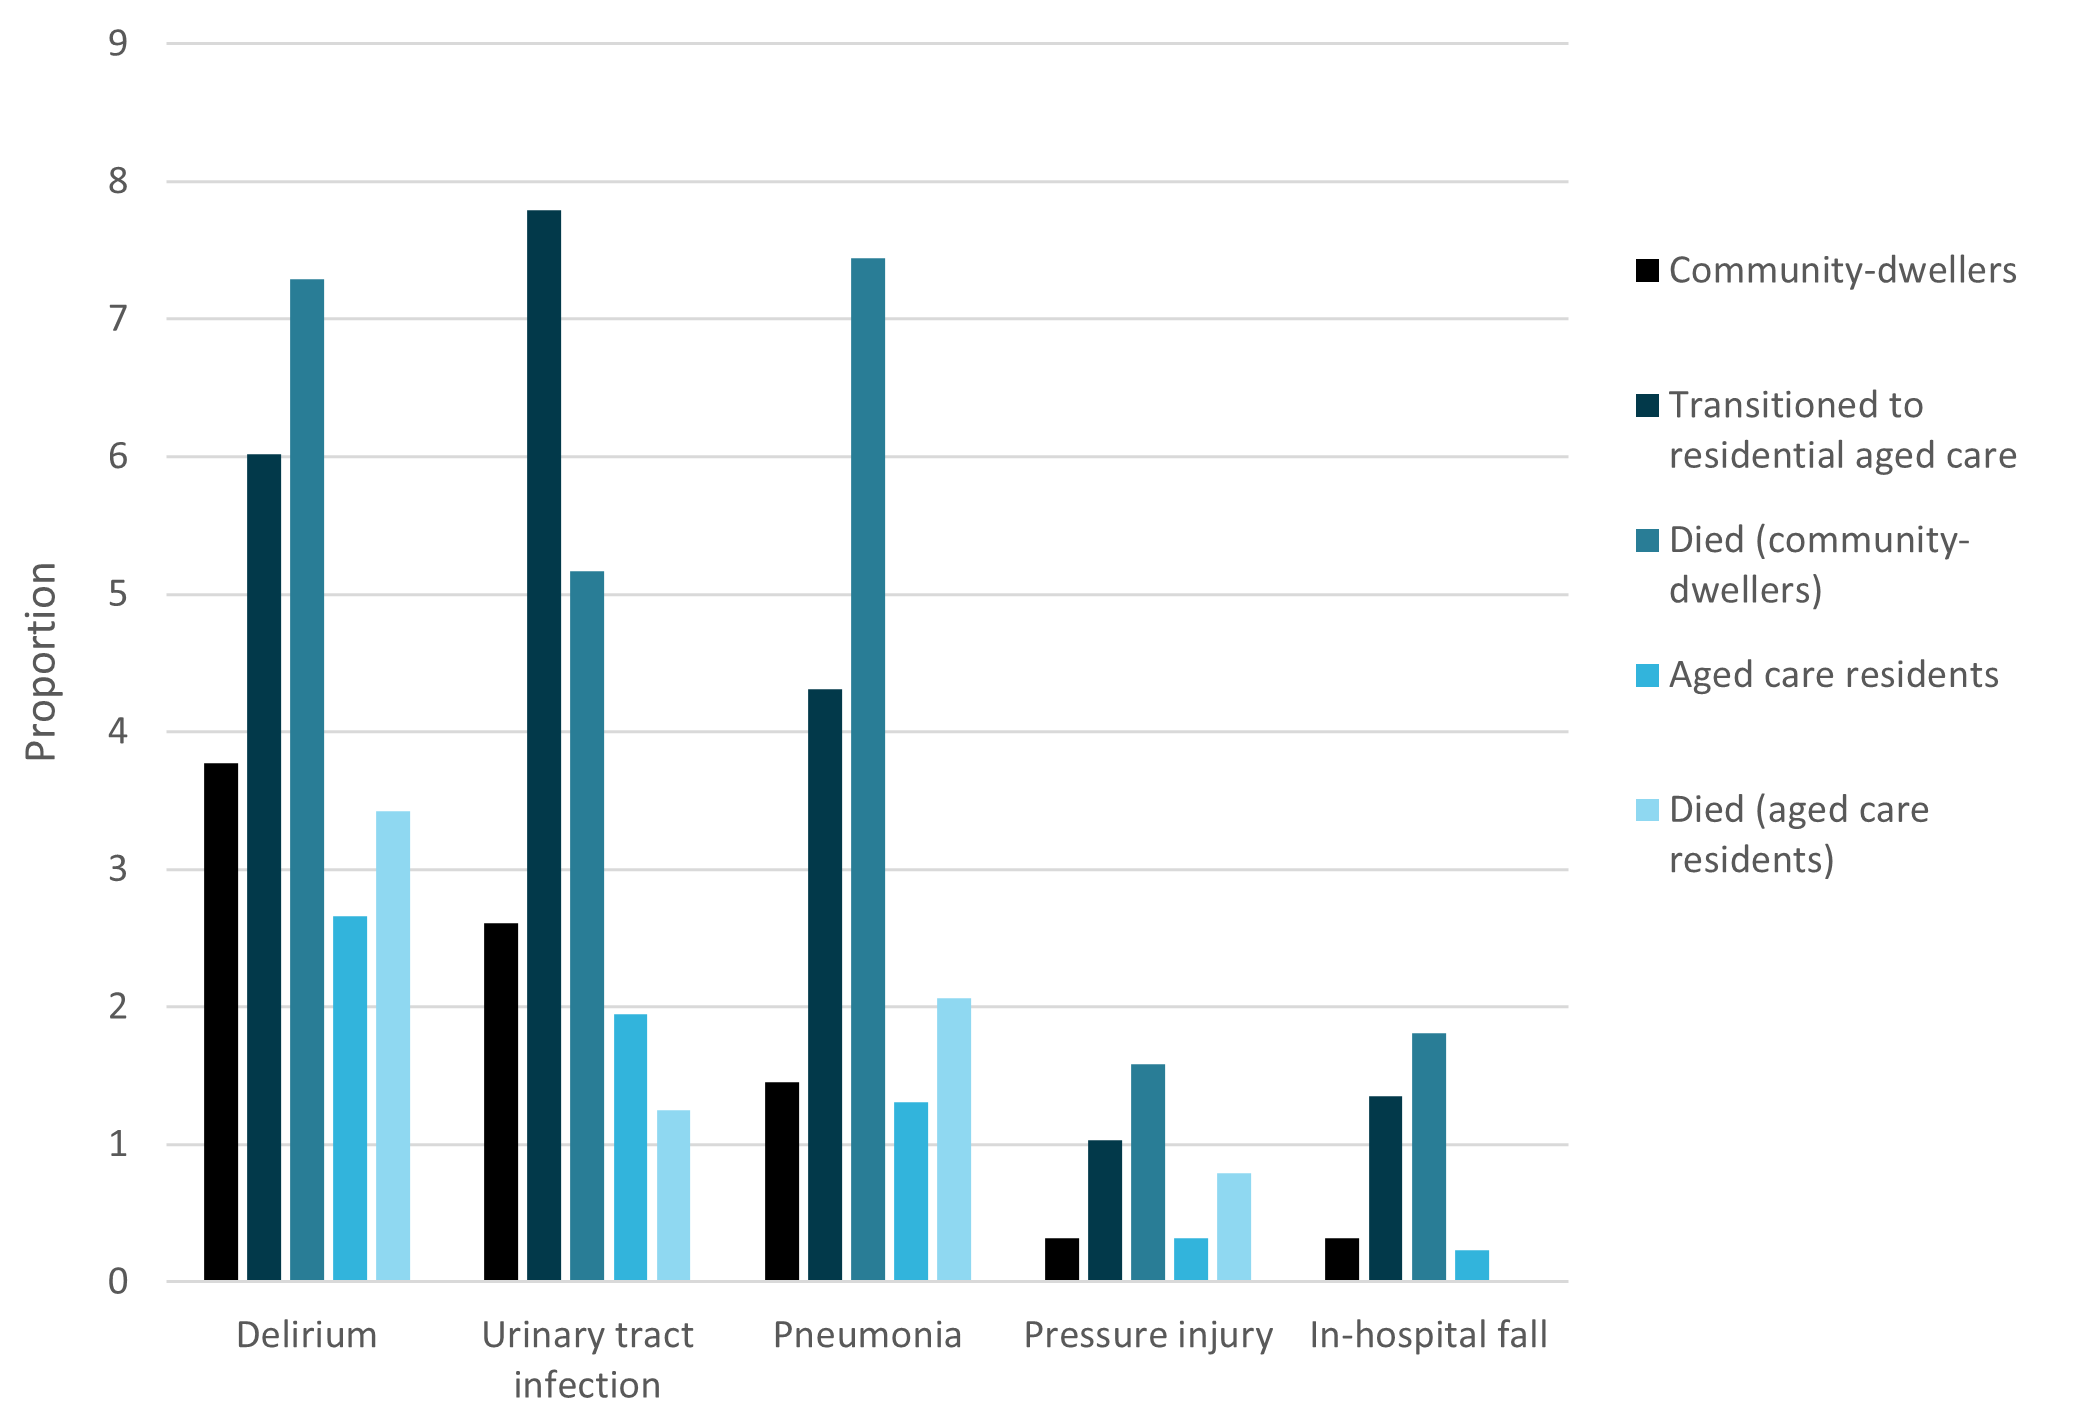 The figure is a bar chart and shows that people who transitioned to residential aged care and community-dwellers who died were more likely to have a potentially preventable complication reported during their hospitalisation compared with community-dwellers, aged care residents and aged care residents who died.